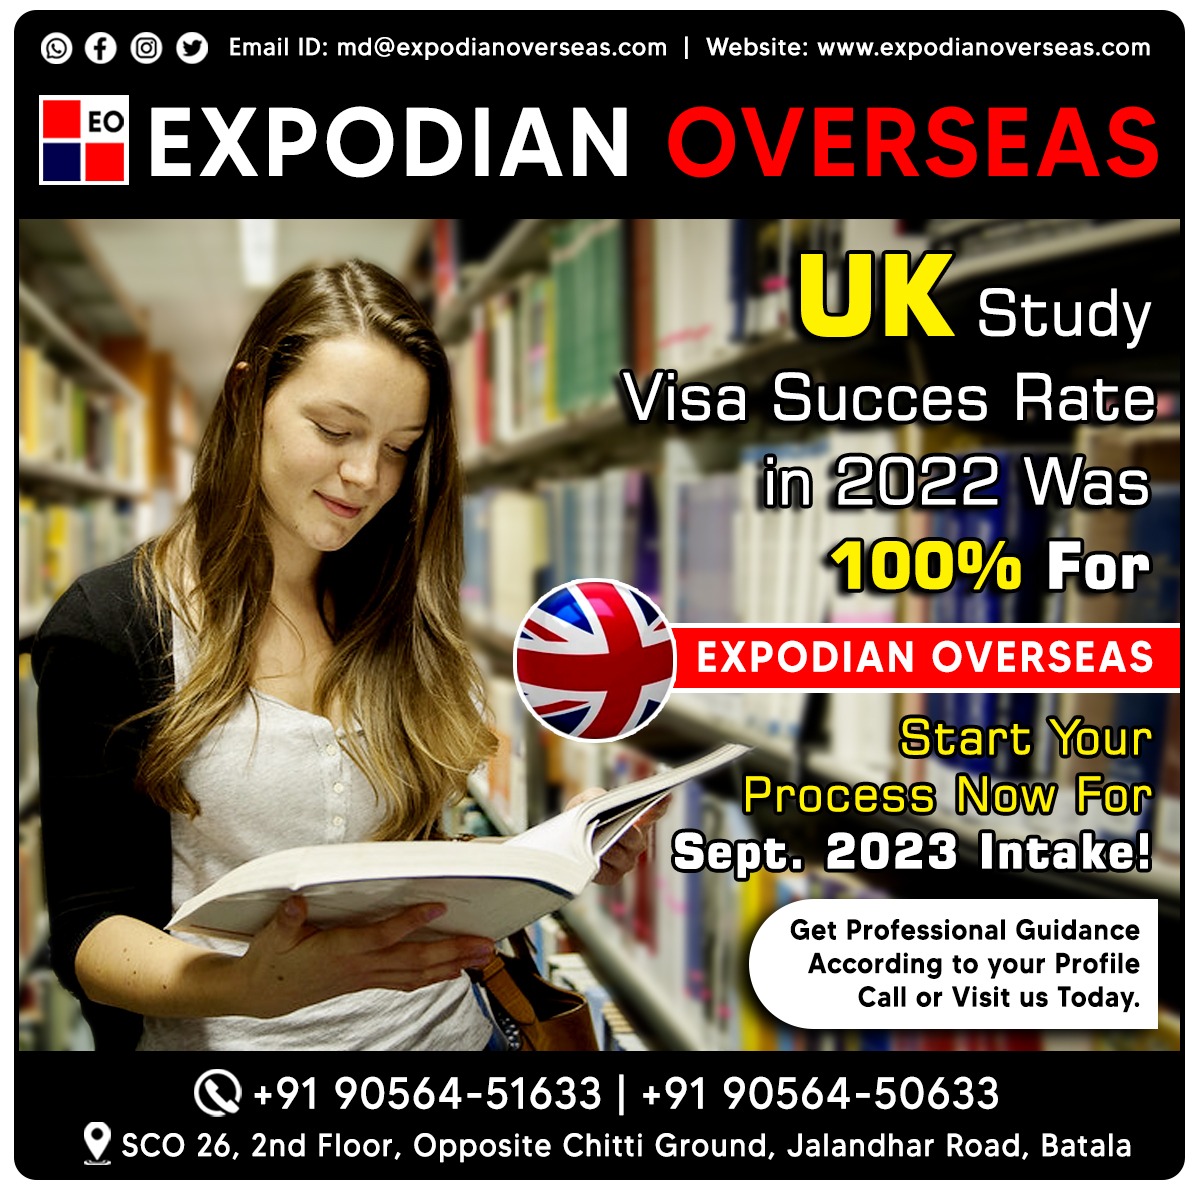 With the grace of Waheguru, We achieved this milestone.. Expodian Overseas proudly announce that UK Study Visa Success rate in 2022 was 100%.  For admission in 2023 Intakes, Please contact us at +91 90564 51633.
#ukstudyvisa #ukstudents #ukwithoutielts #WithoutIELTS #studyinuk